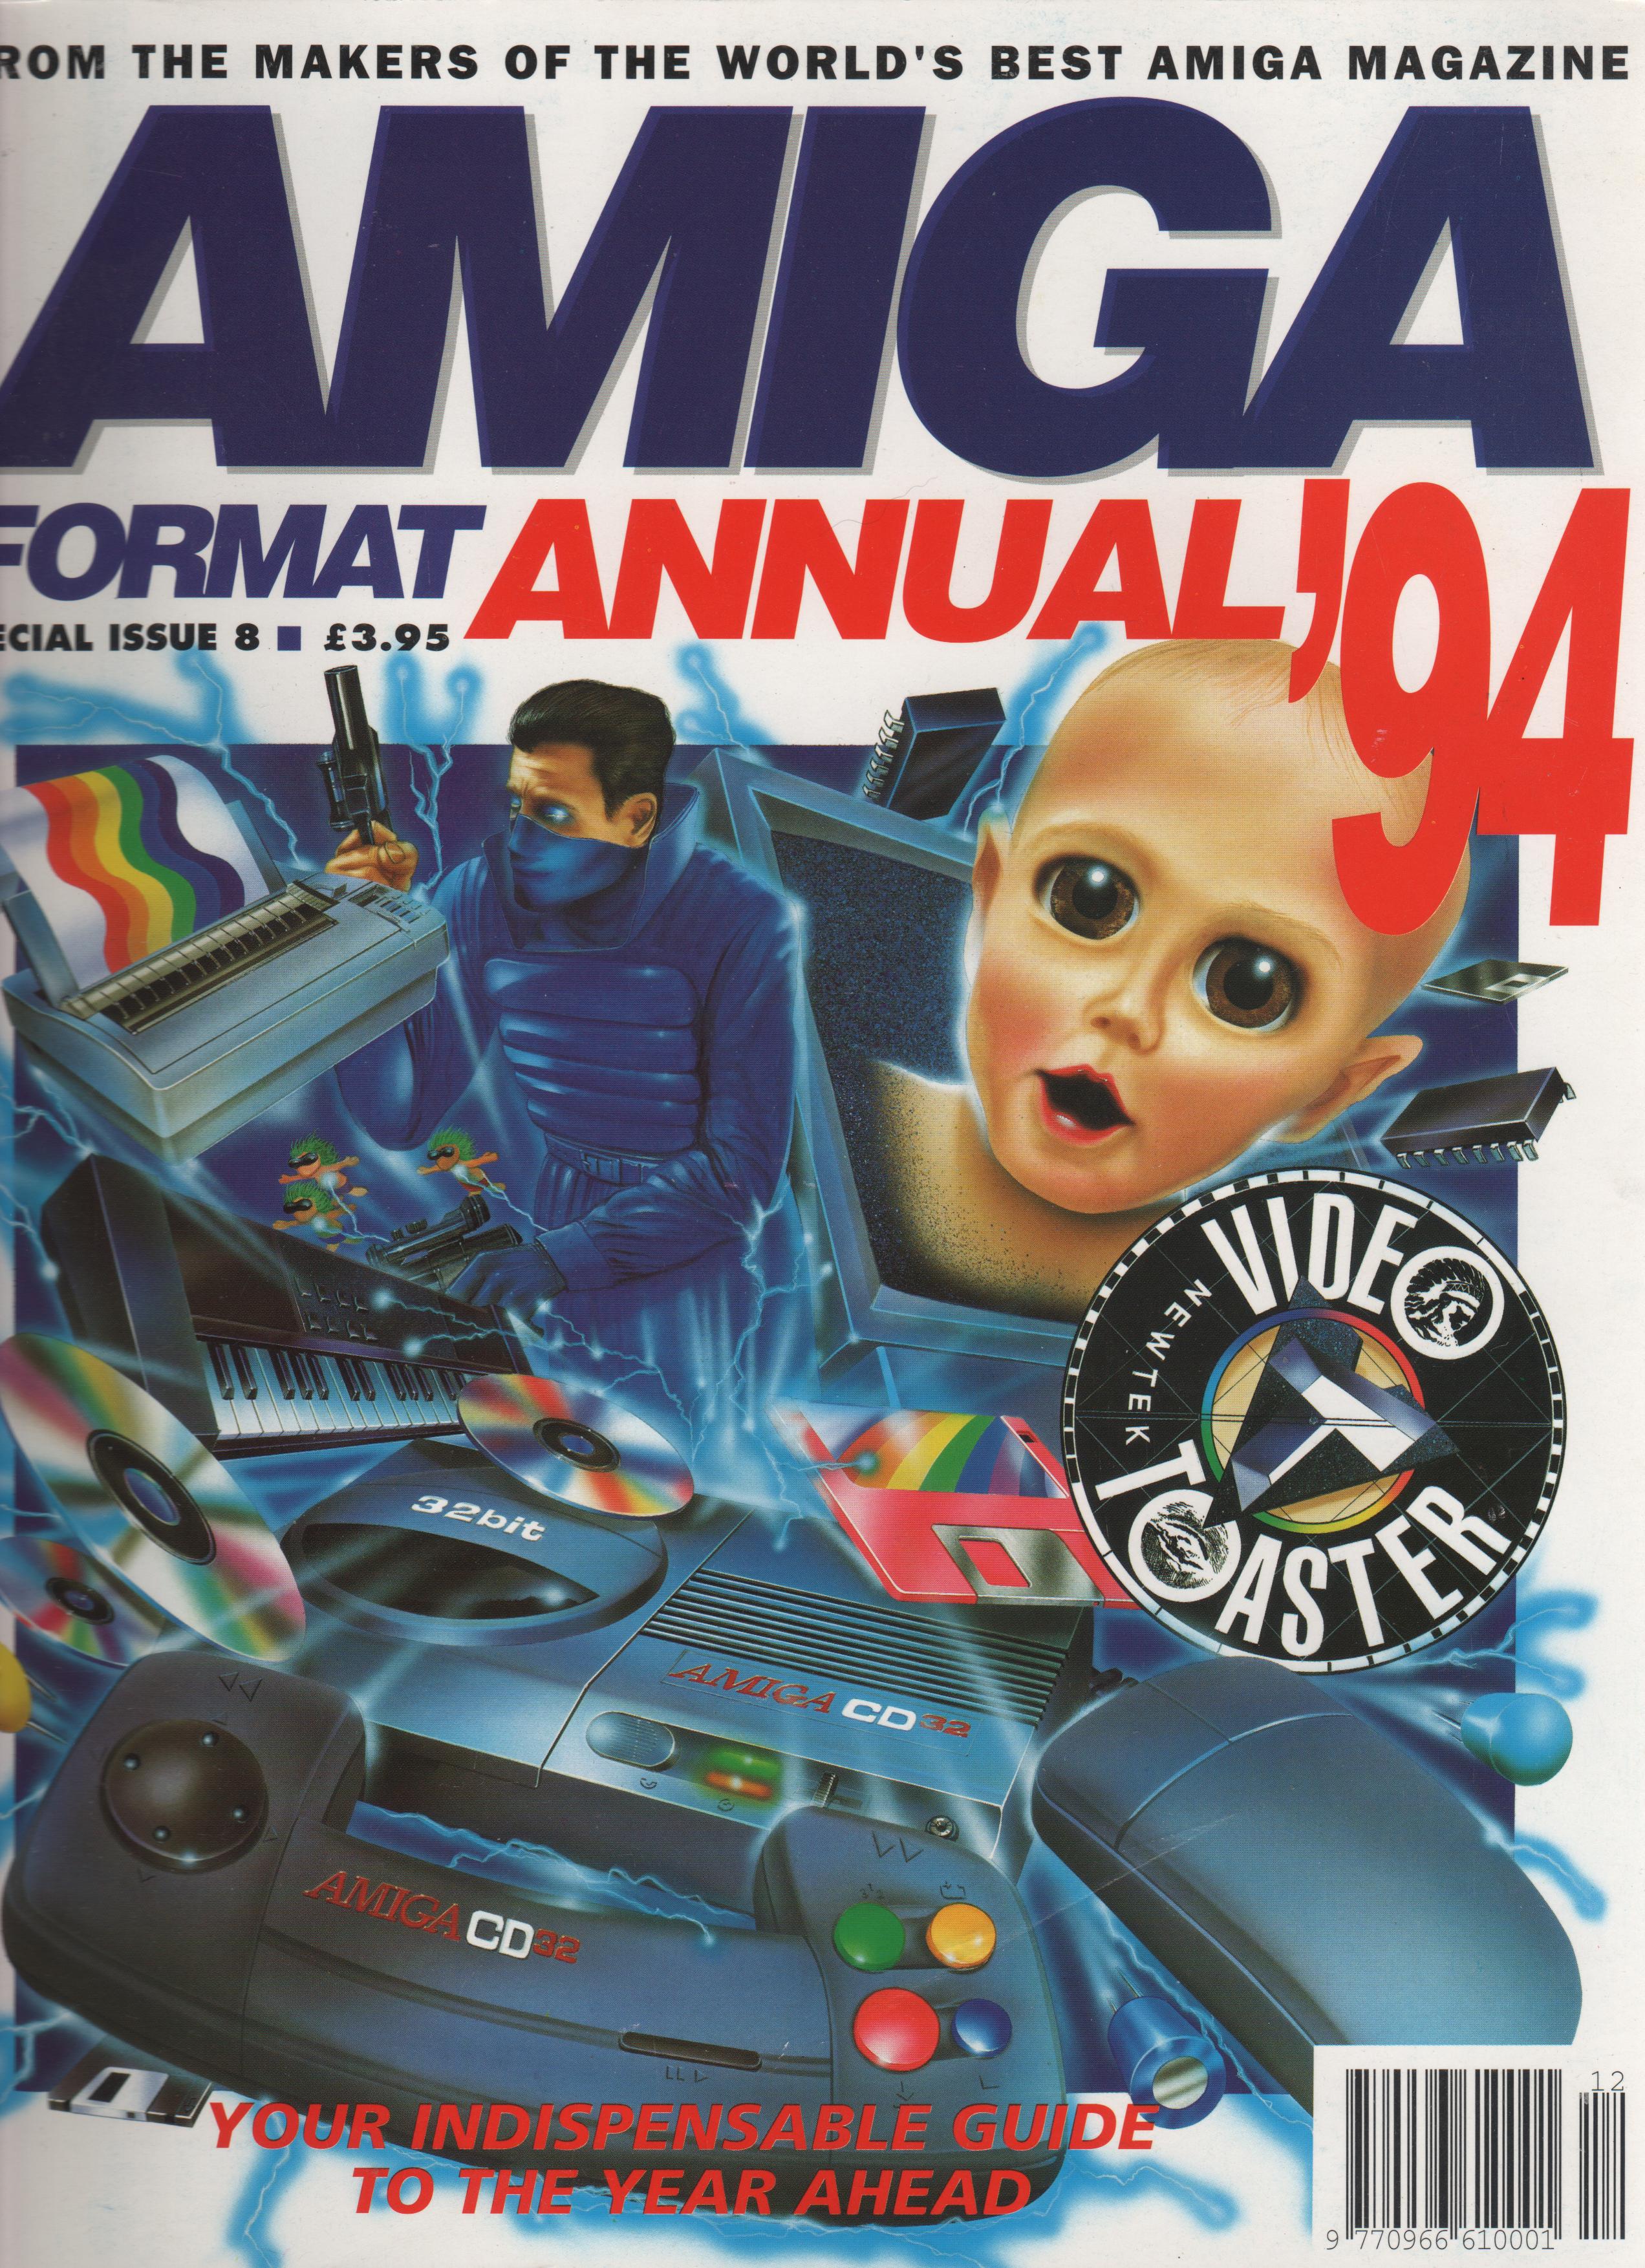 Front cover of Amiga format annual 94 special issue 8